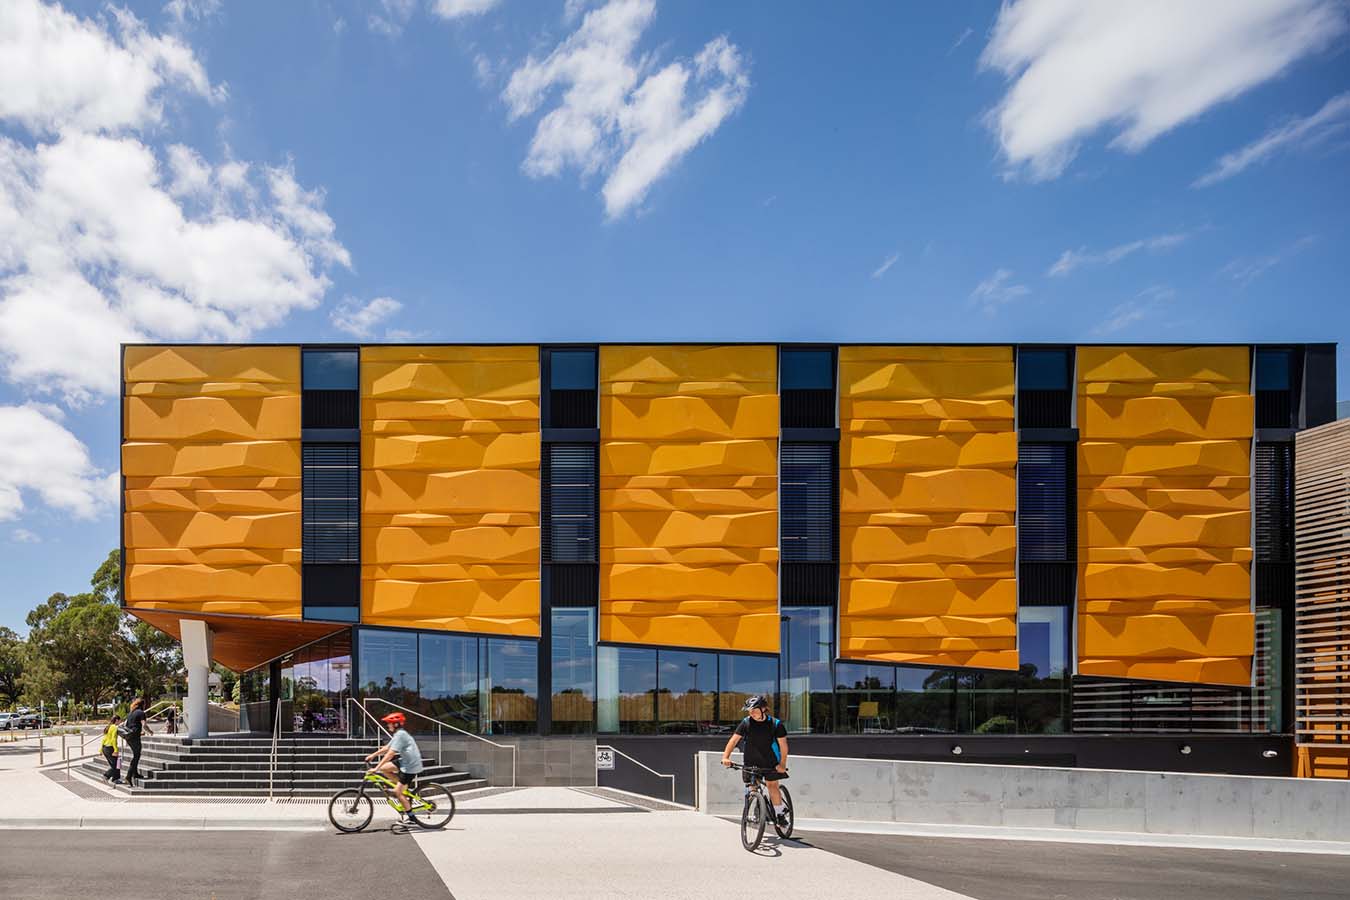 The northern facade features ochre coloured panels in vertical bands with glazing between.